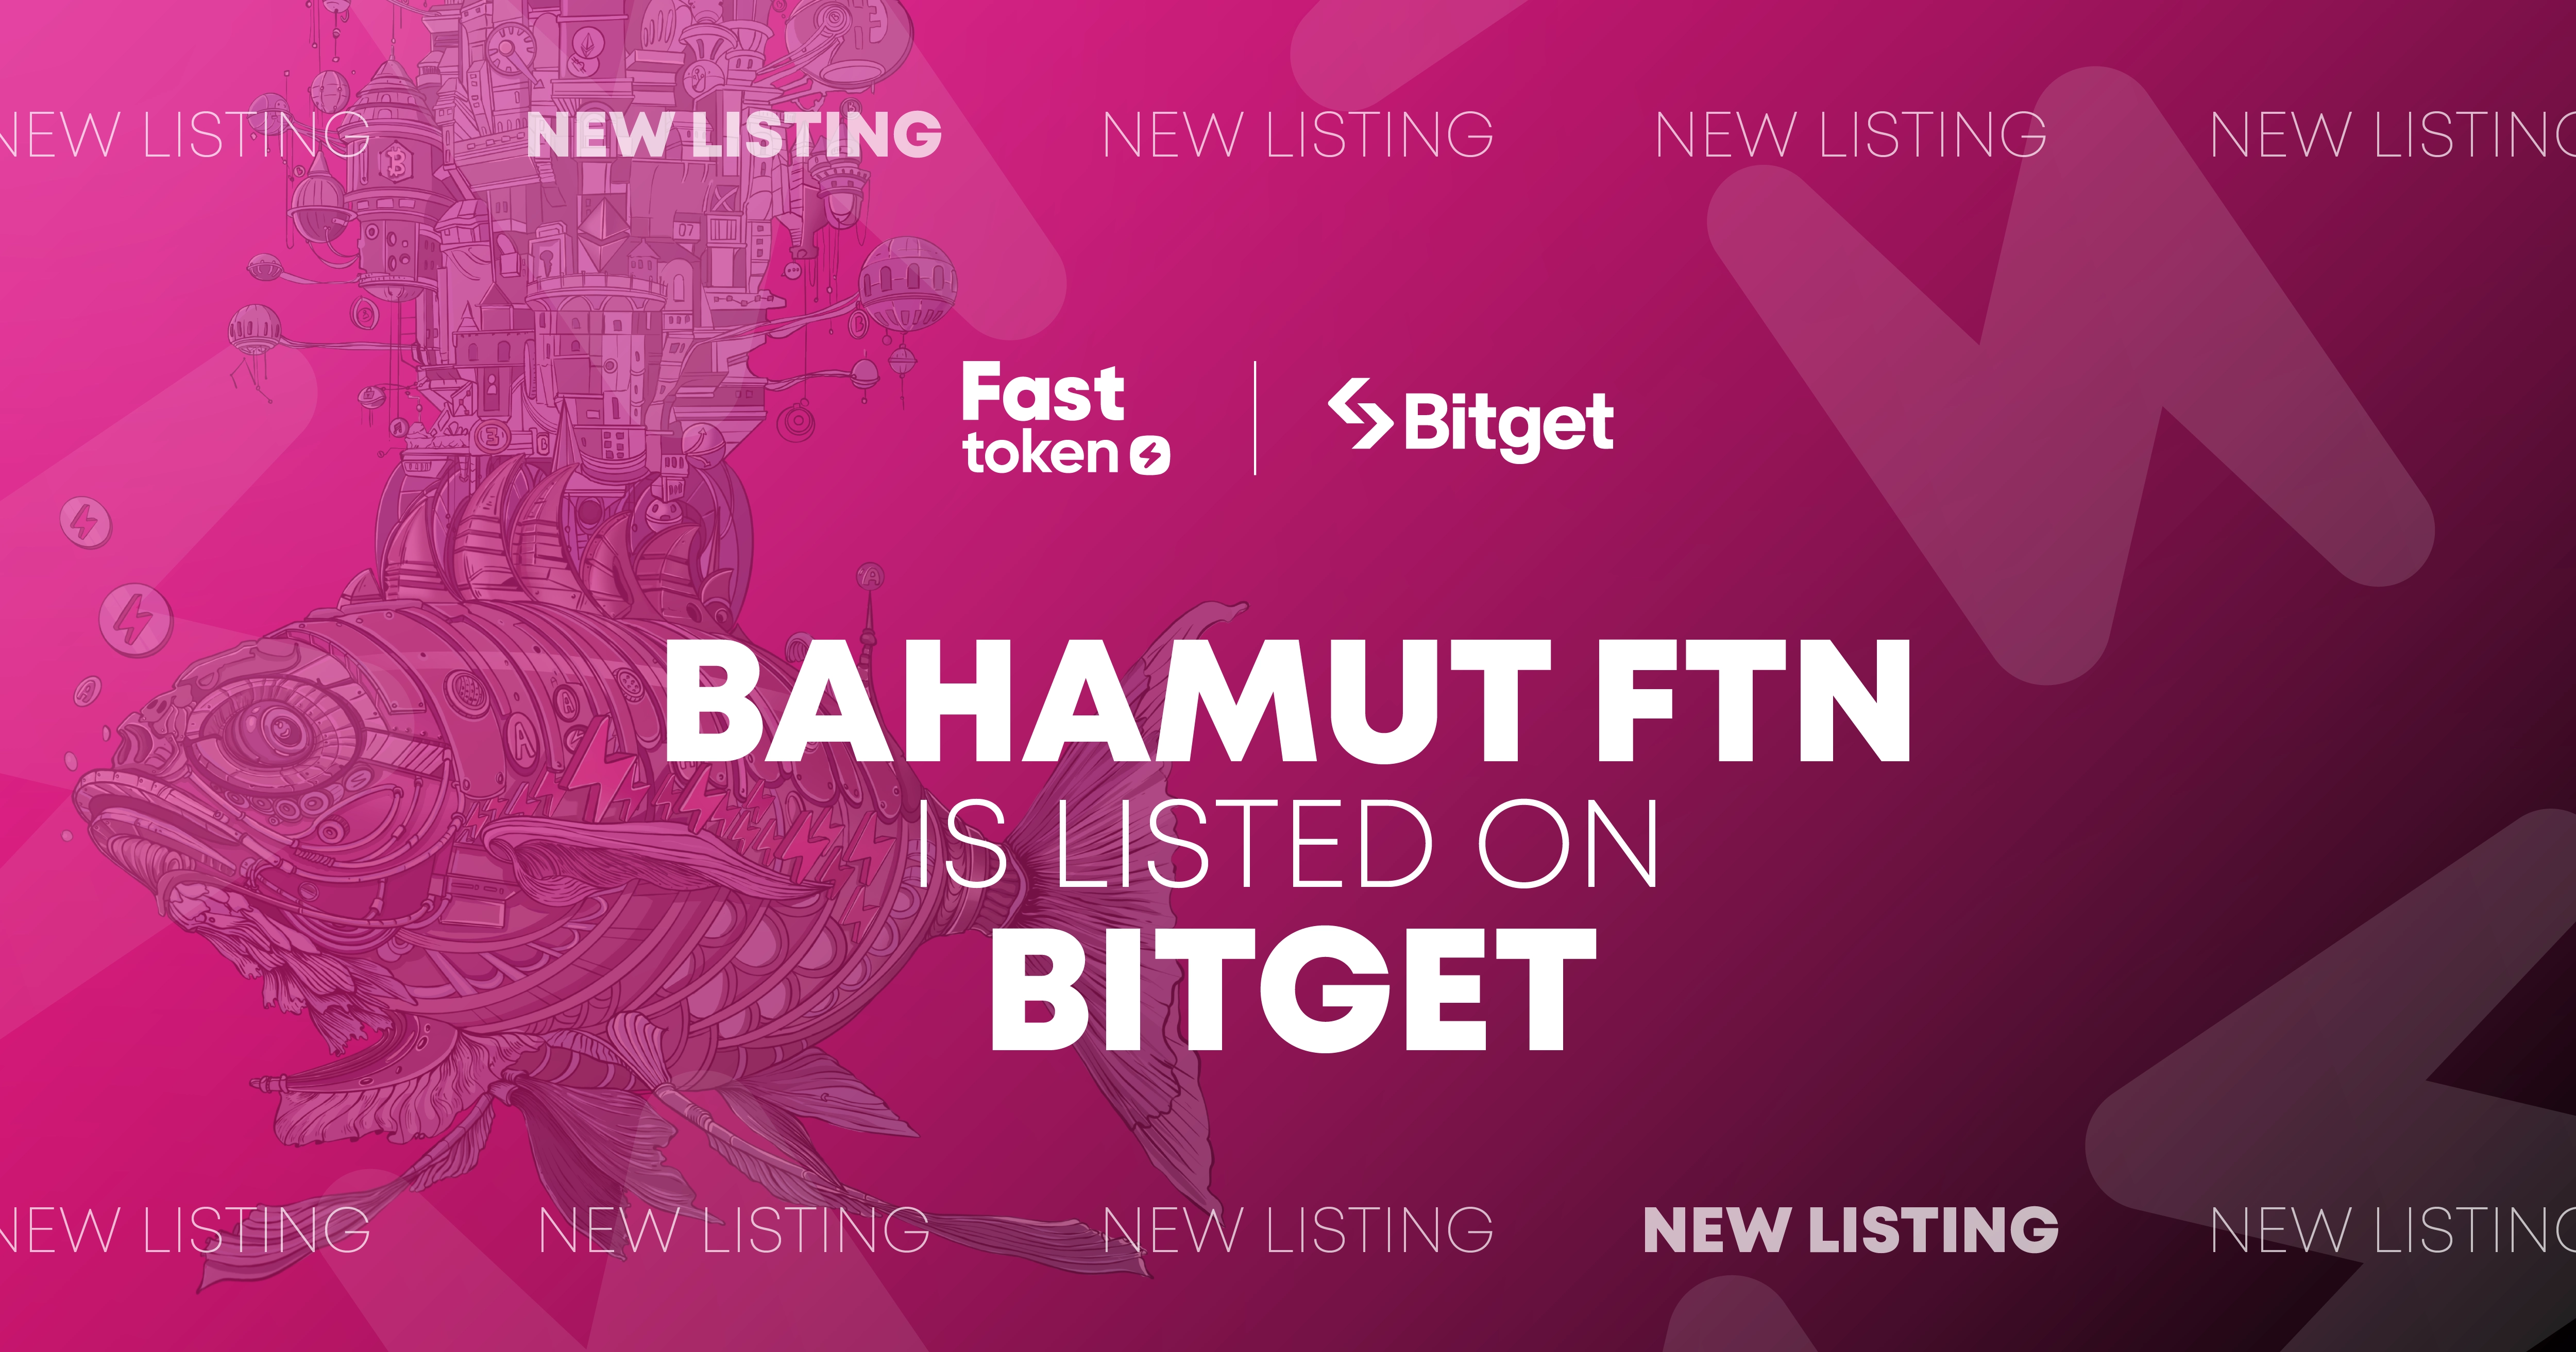 Bahamut FTN is now listed on Bitget